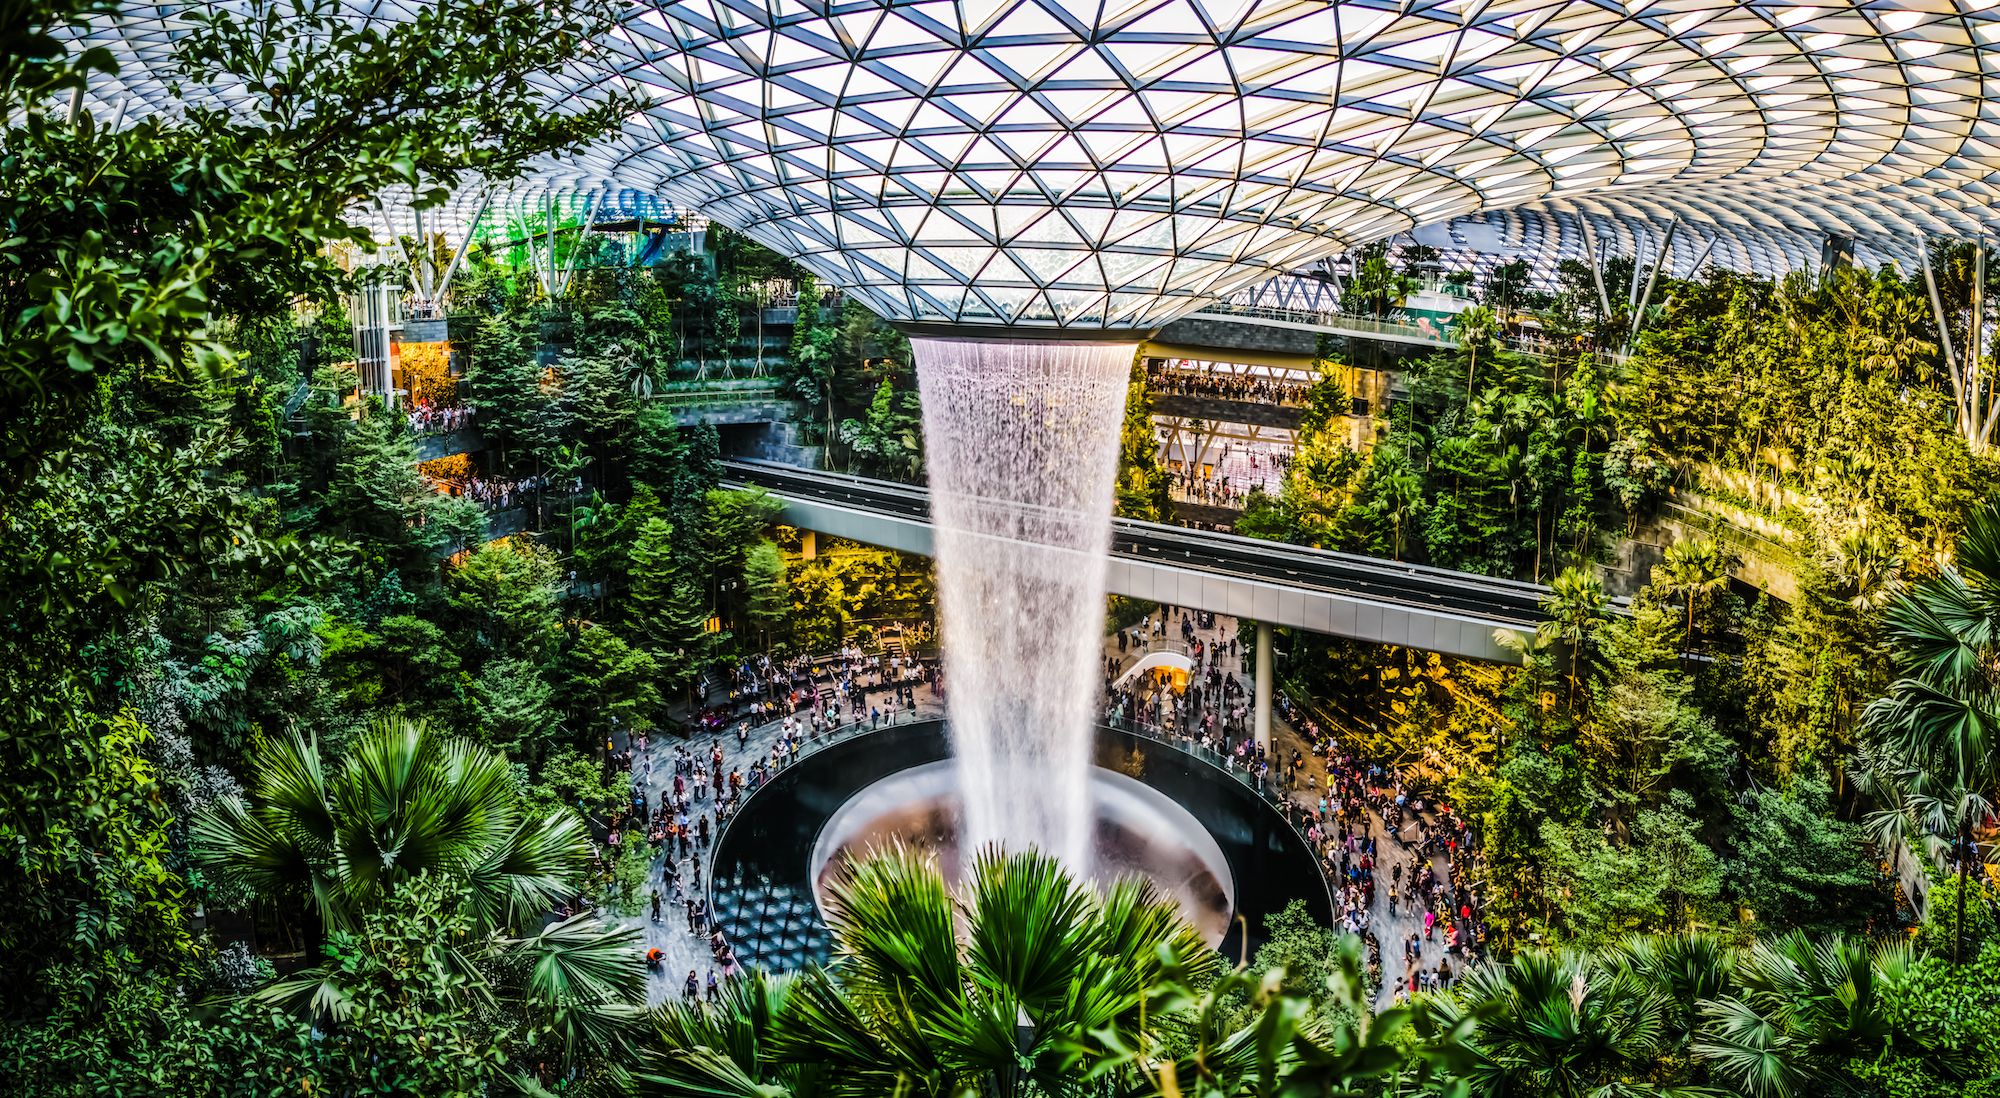 An overview of the plants and indoor waterfall at Jewel Changi Airport.